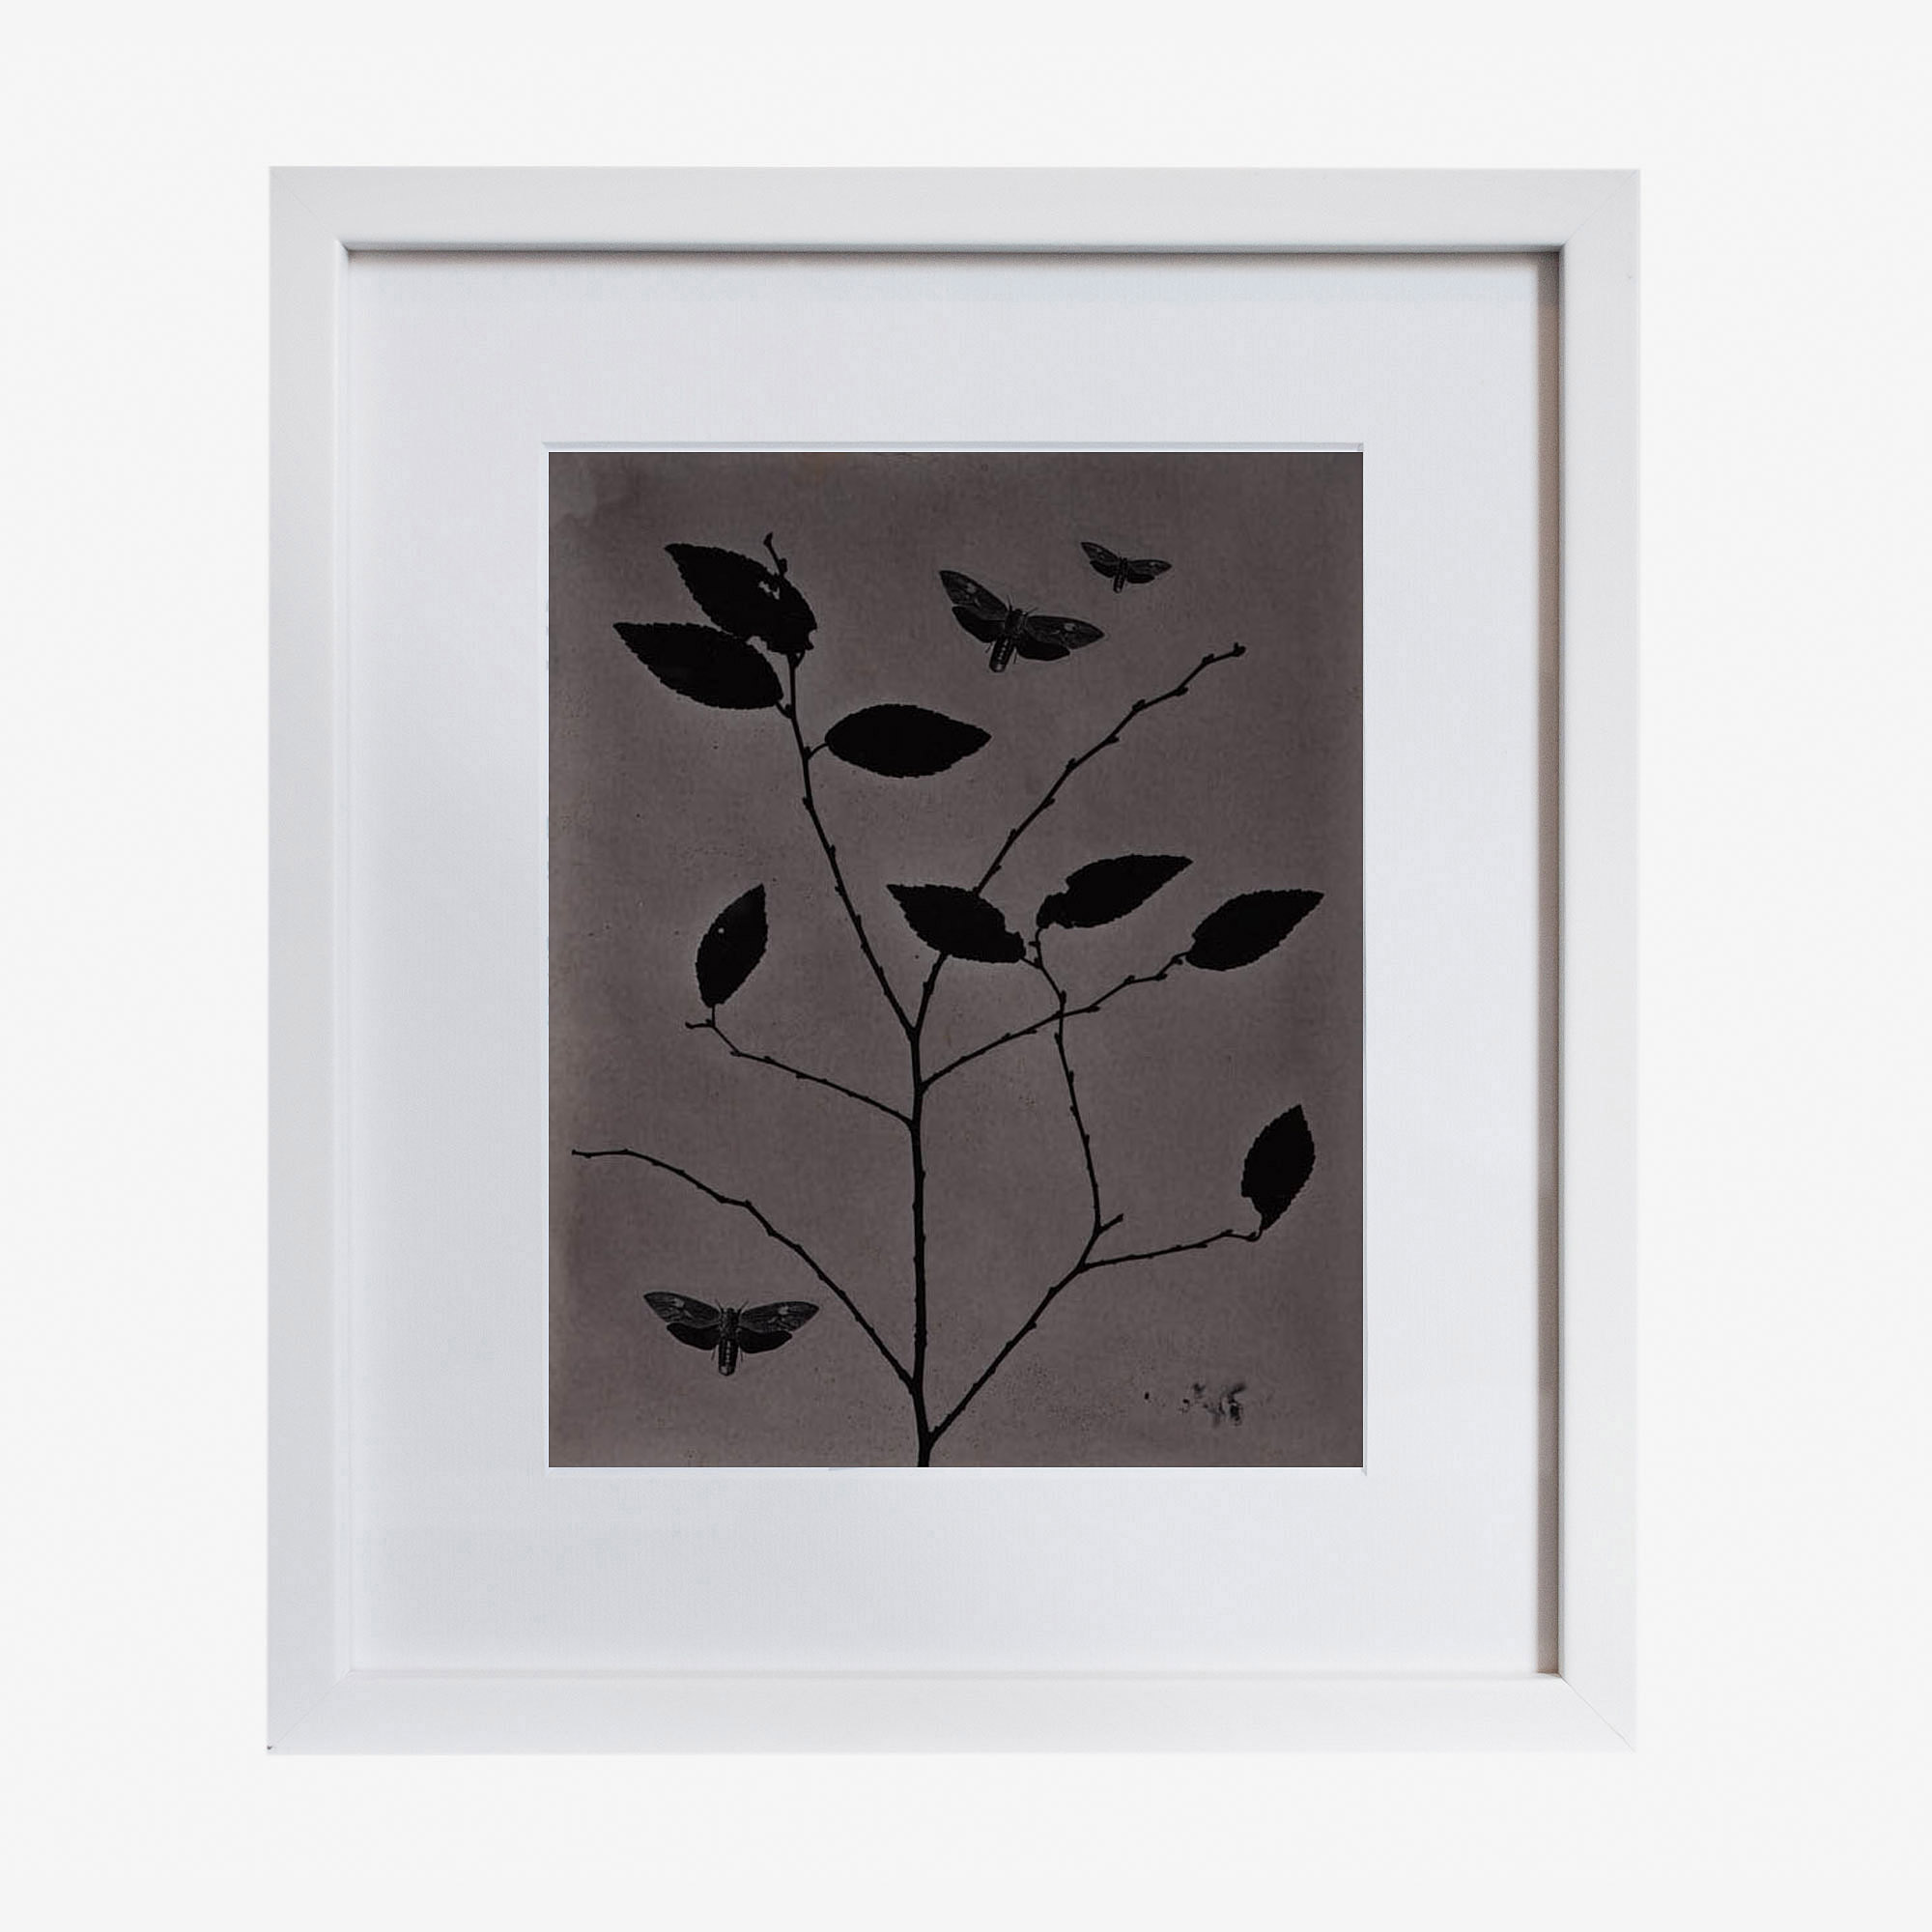 Emergence 328, unique analogue photogram in frame by Holly Schulte